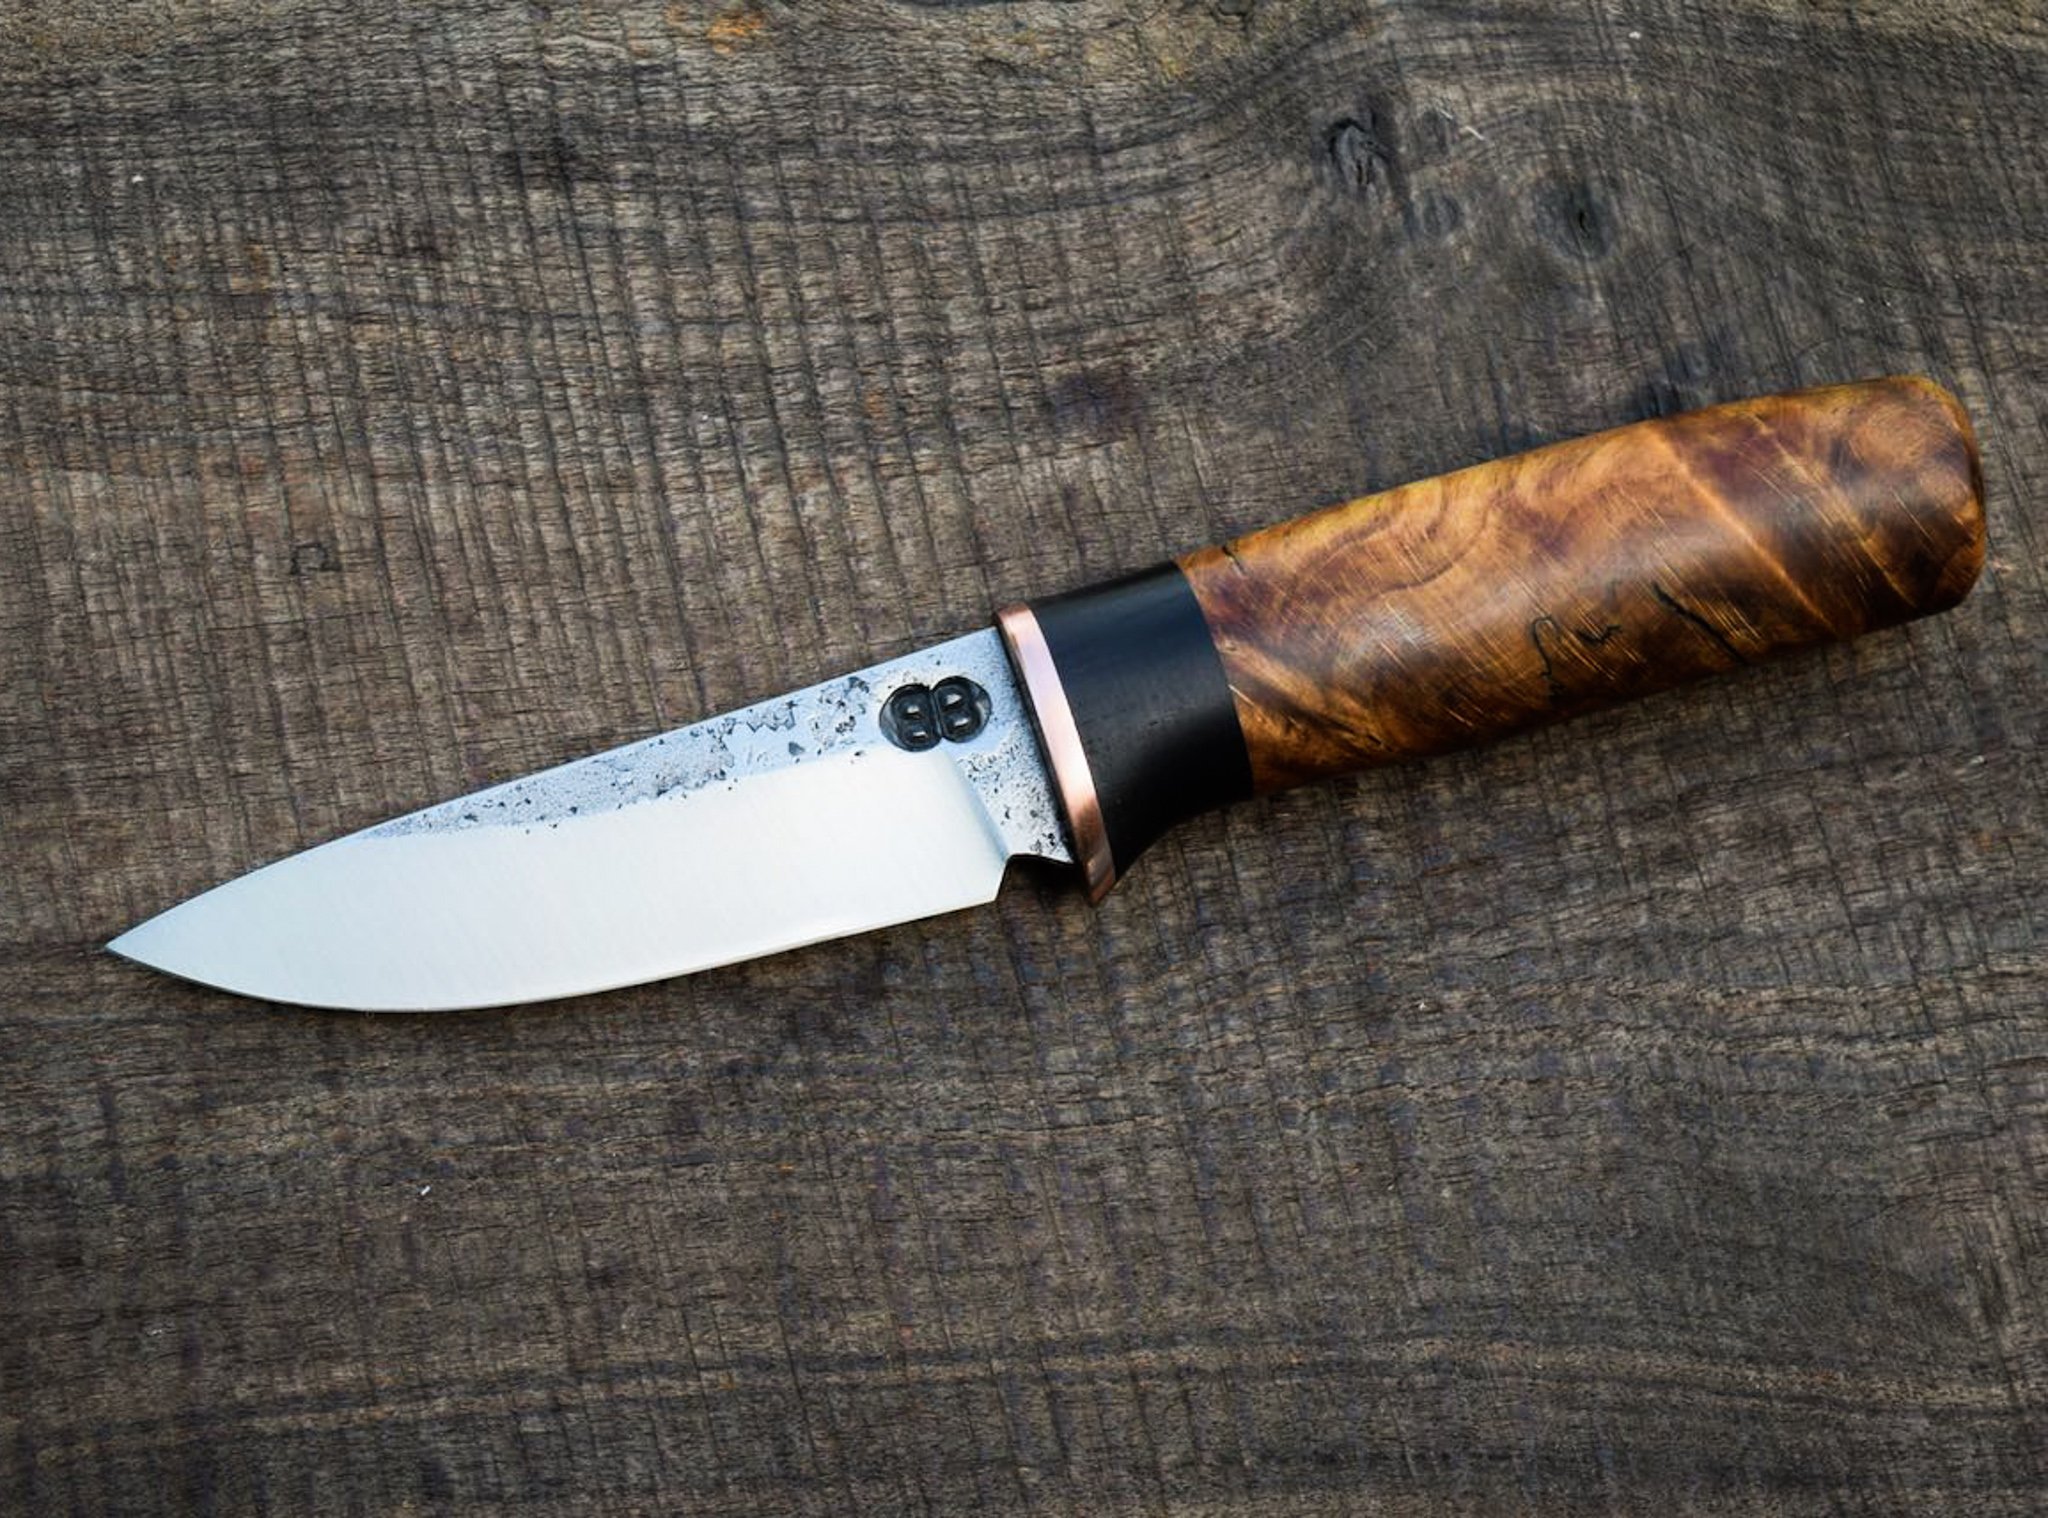  4” Drop Point Hunter with Forge Finish. Copper Guard with Blackwood Spacer and Chestnut Burl Handle. 